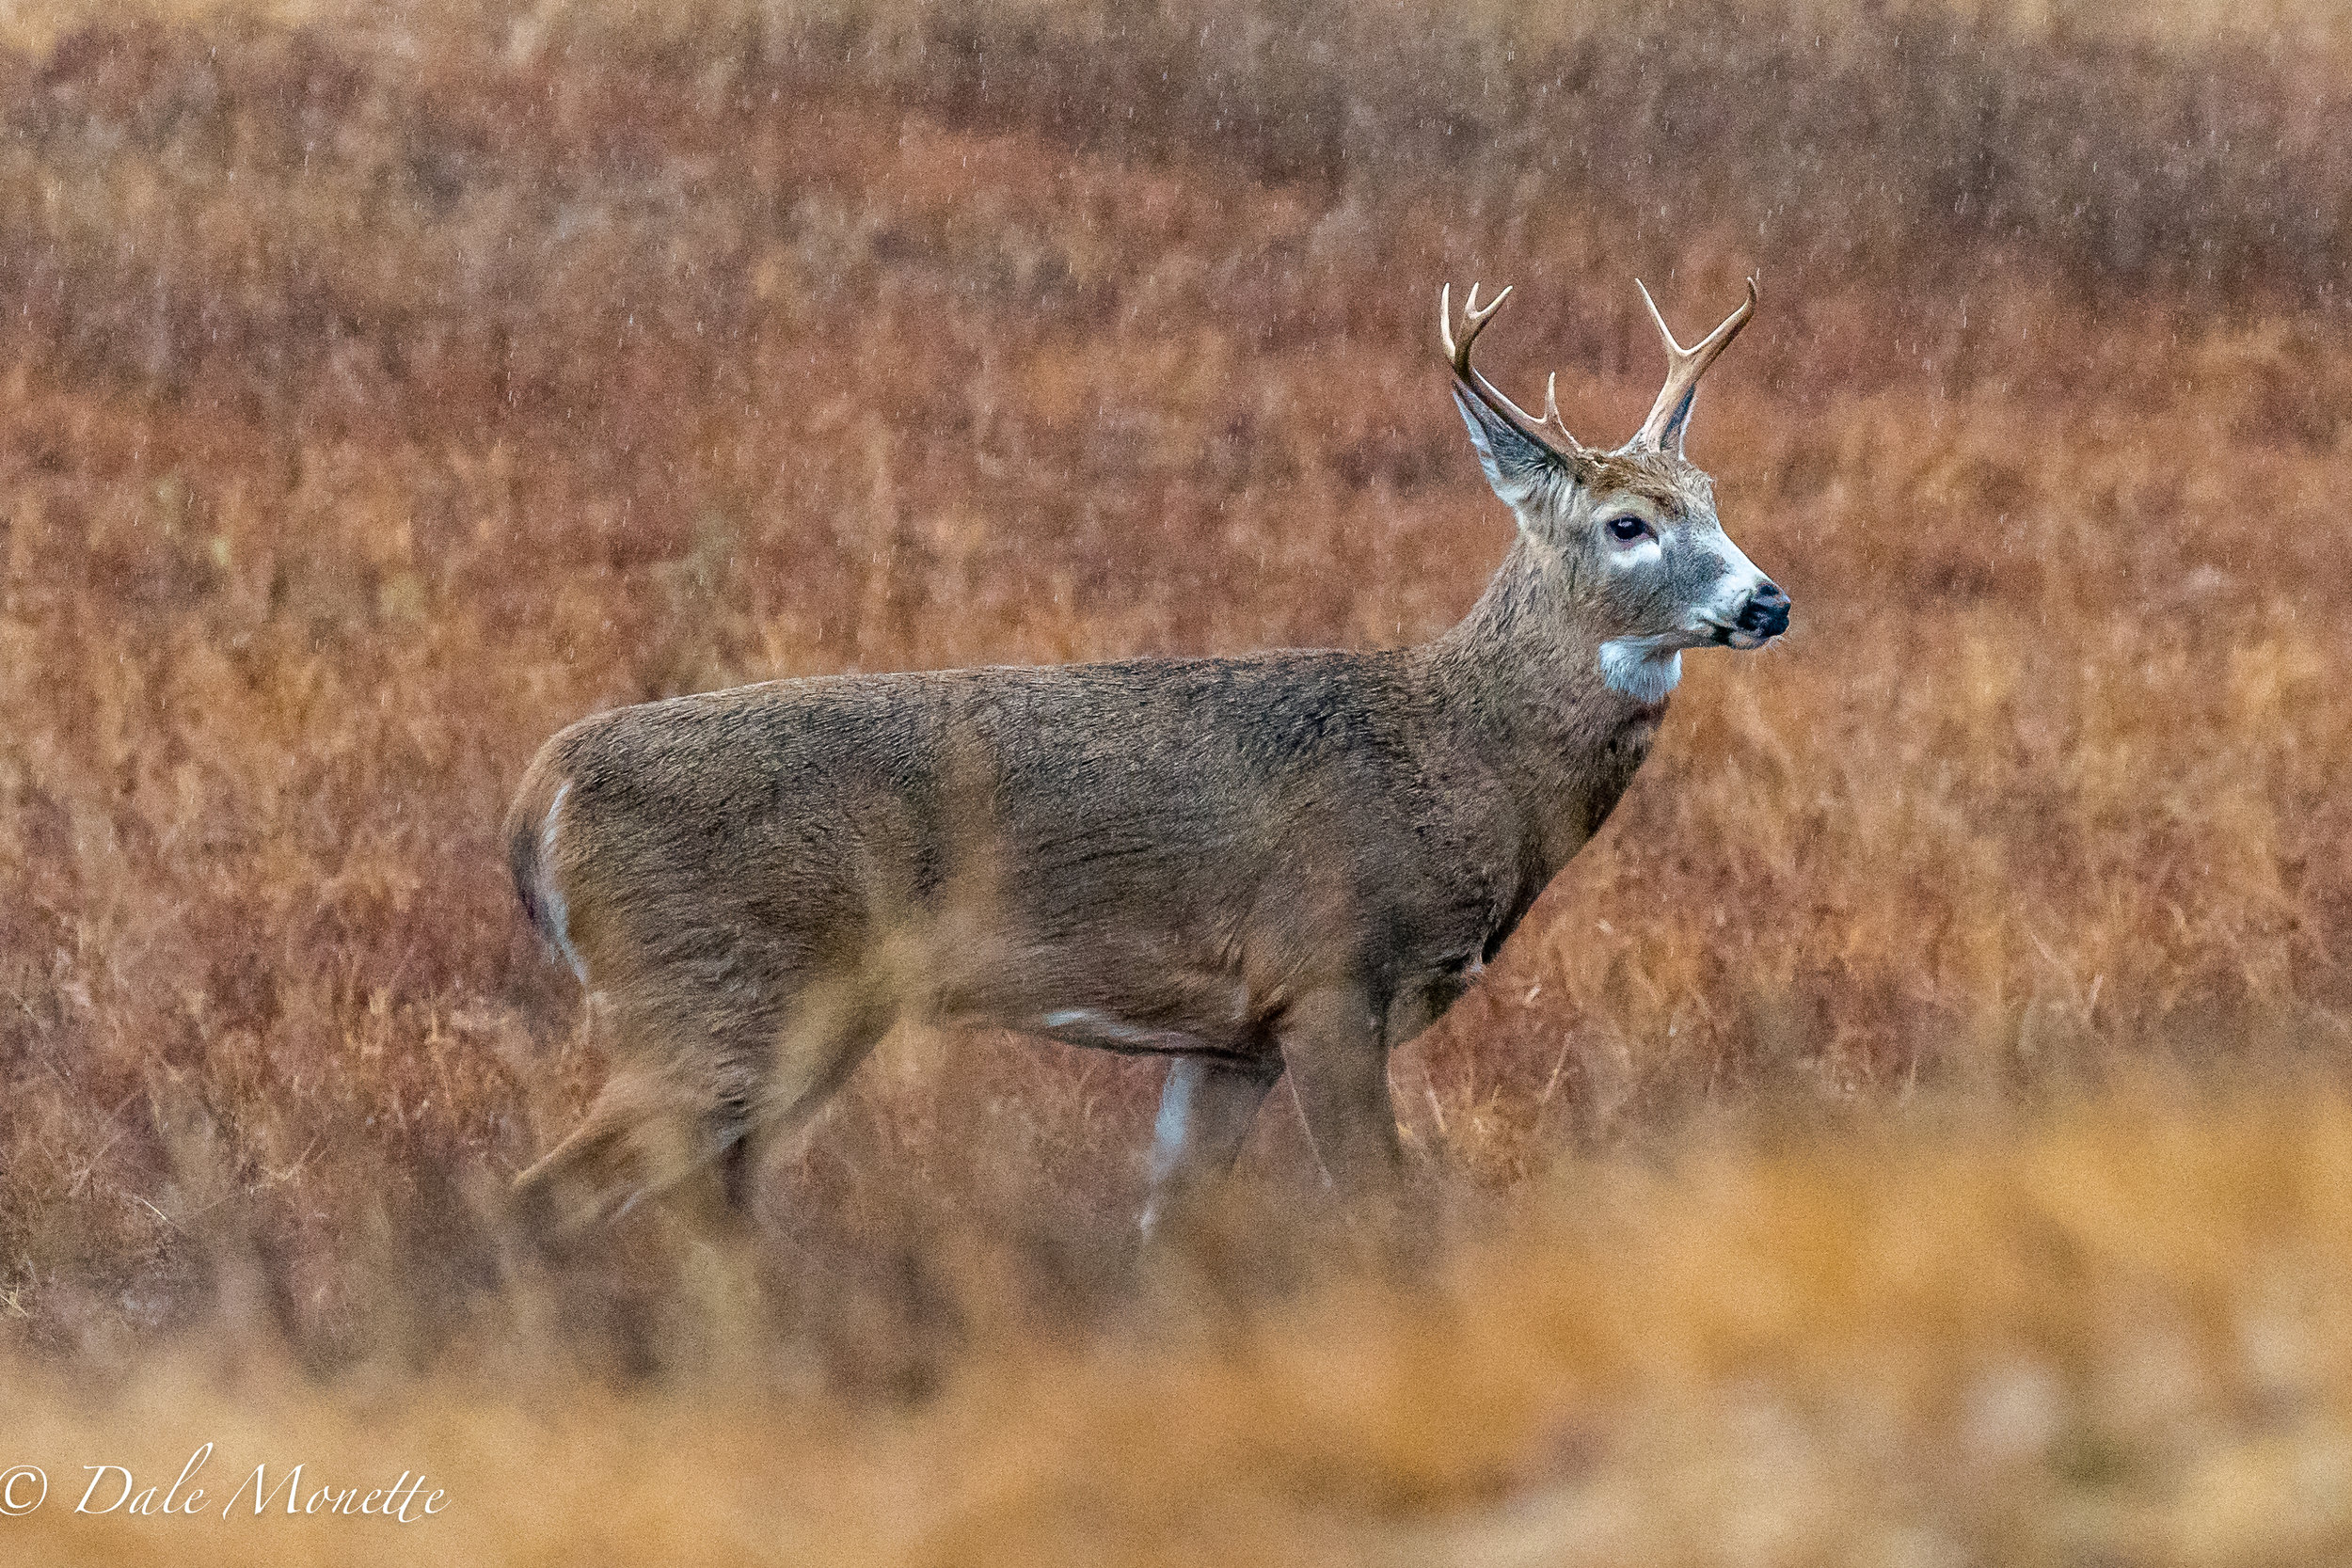   Last week I caught this 1.5 year old white-tailed buck looking for love in the rain ! :)&nbsp; He was oblivious to me and strolled along with his nose in the air sniffing away to beat the band !&nbsp;&nbsp;  